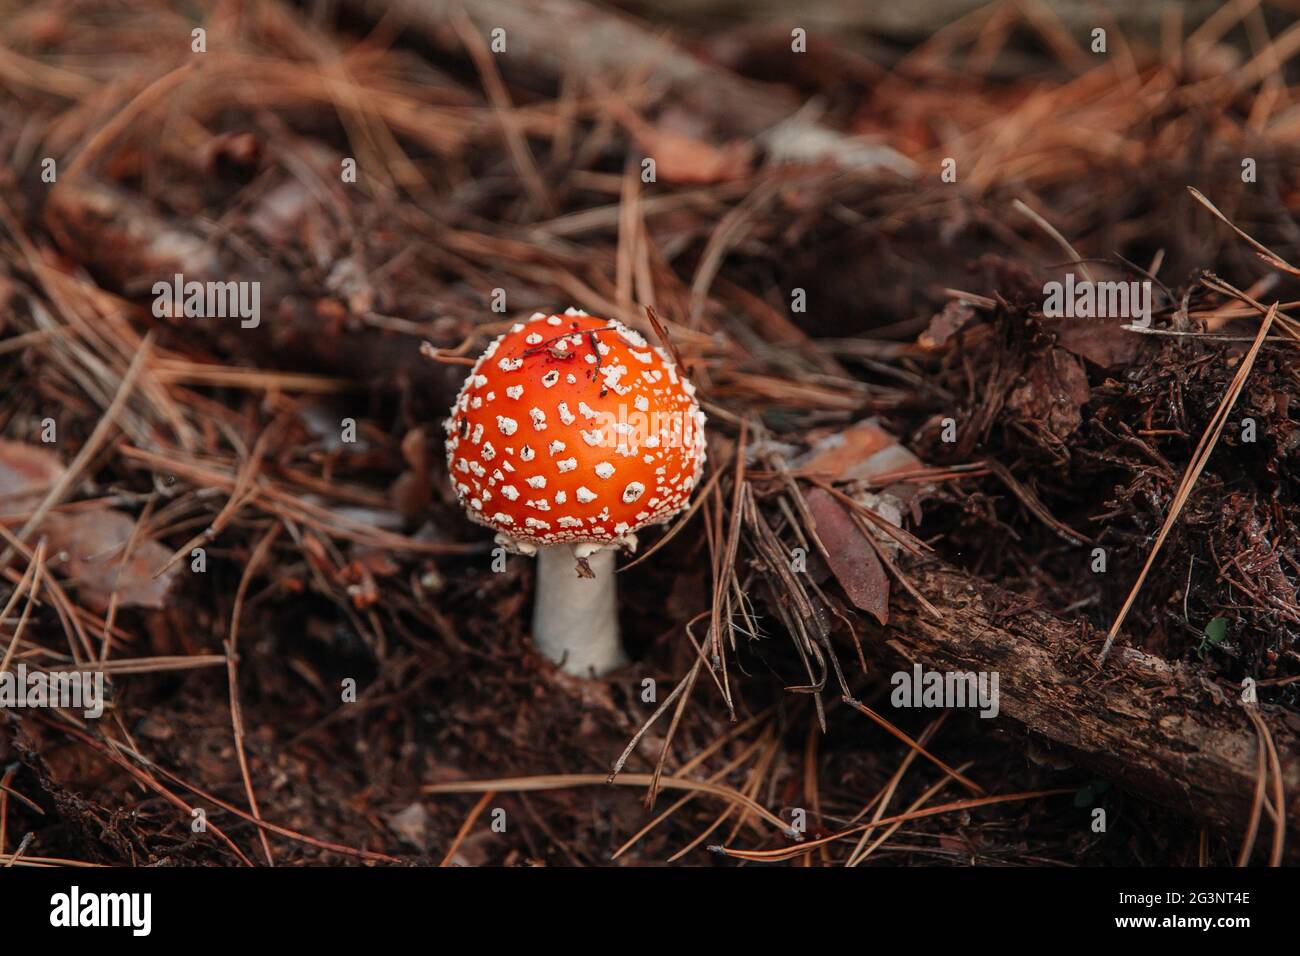 Red fly agaric mushroom or toadstool in the grass and coniferous foliage. Latin name is Amanita muscaria. Toxic mushroom. Stock Photo